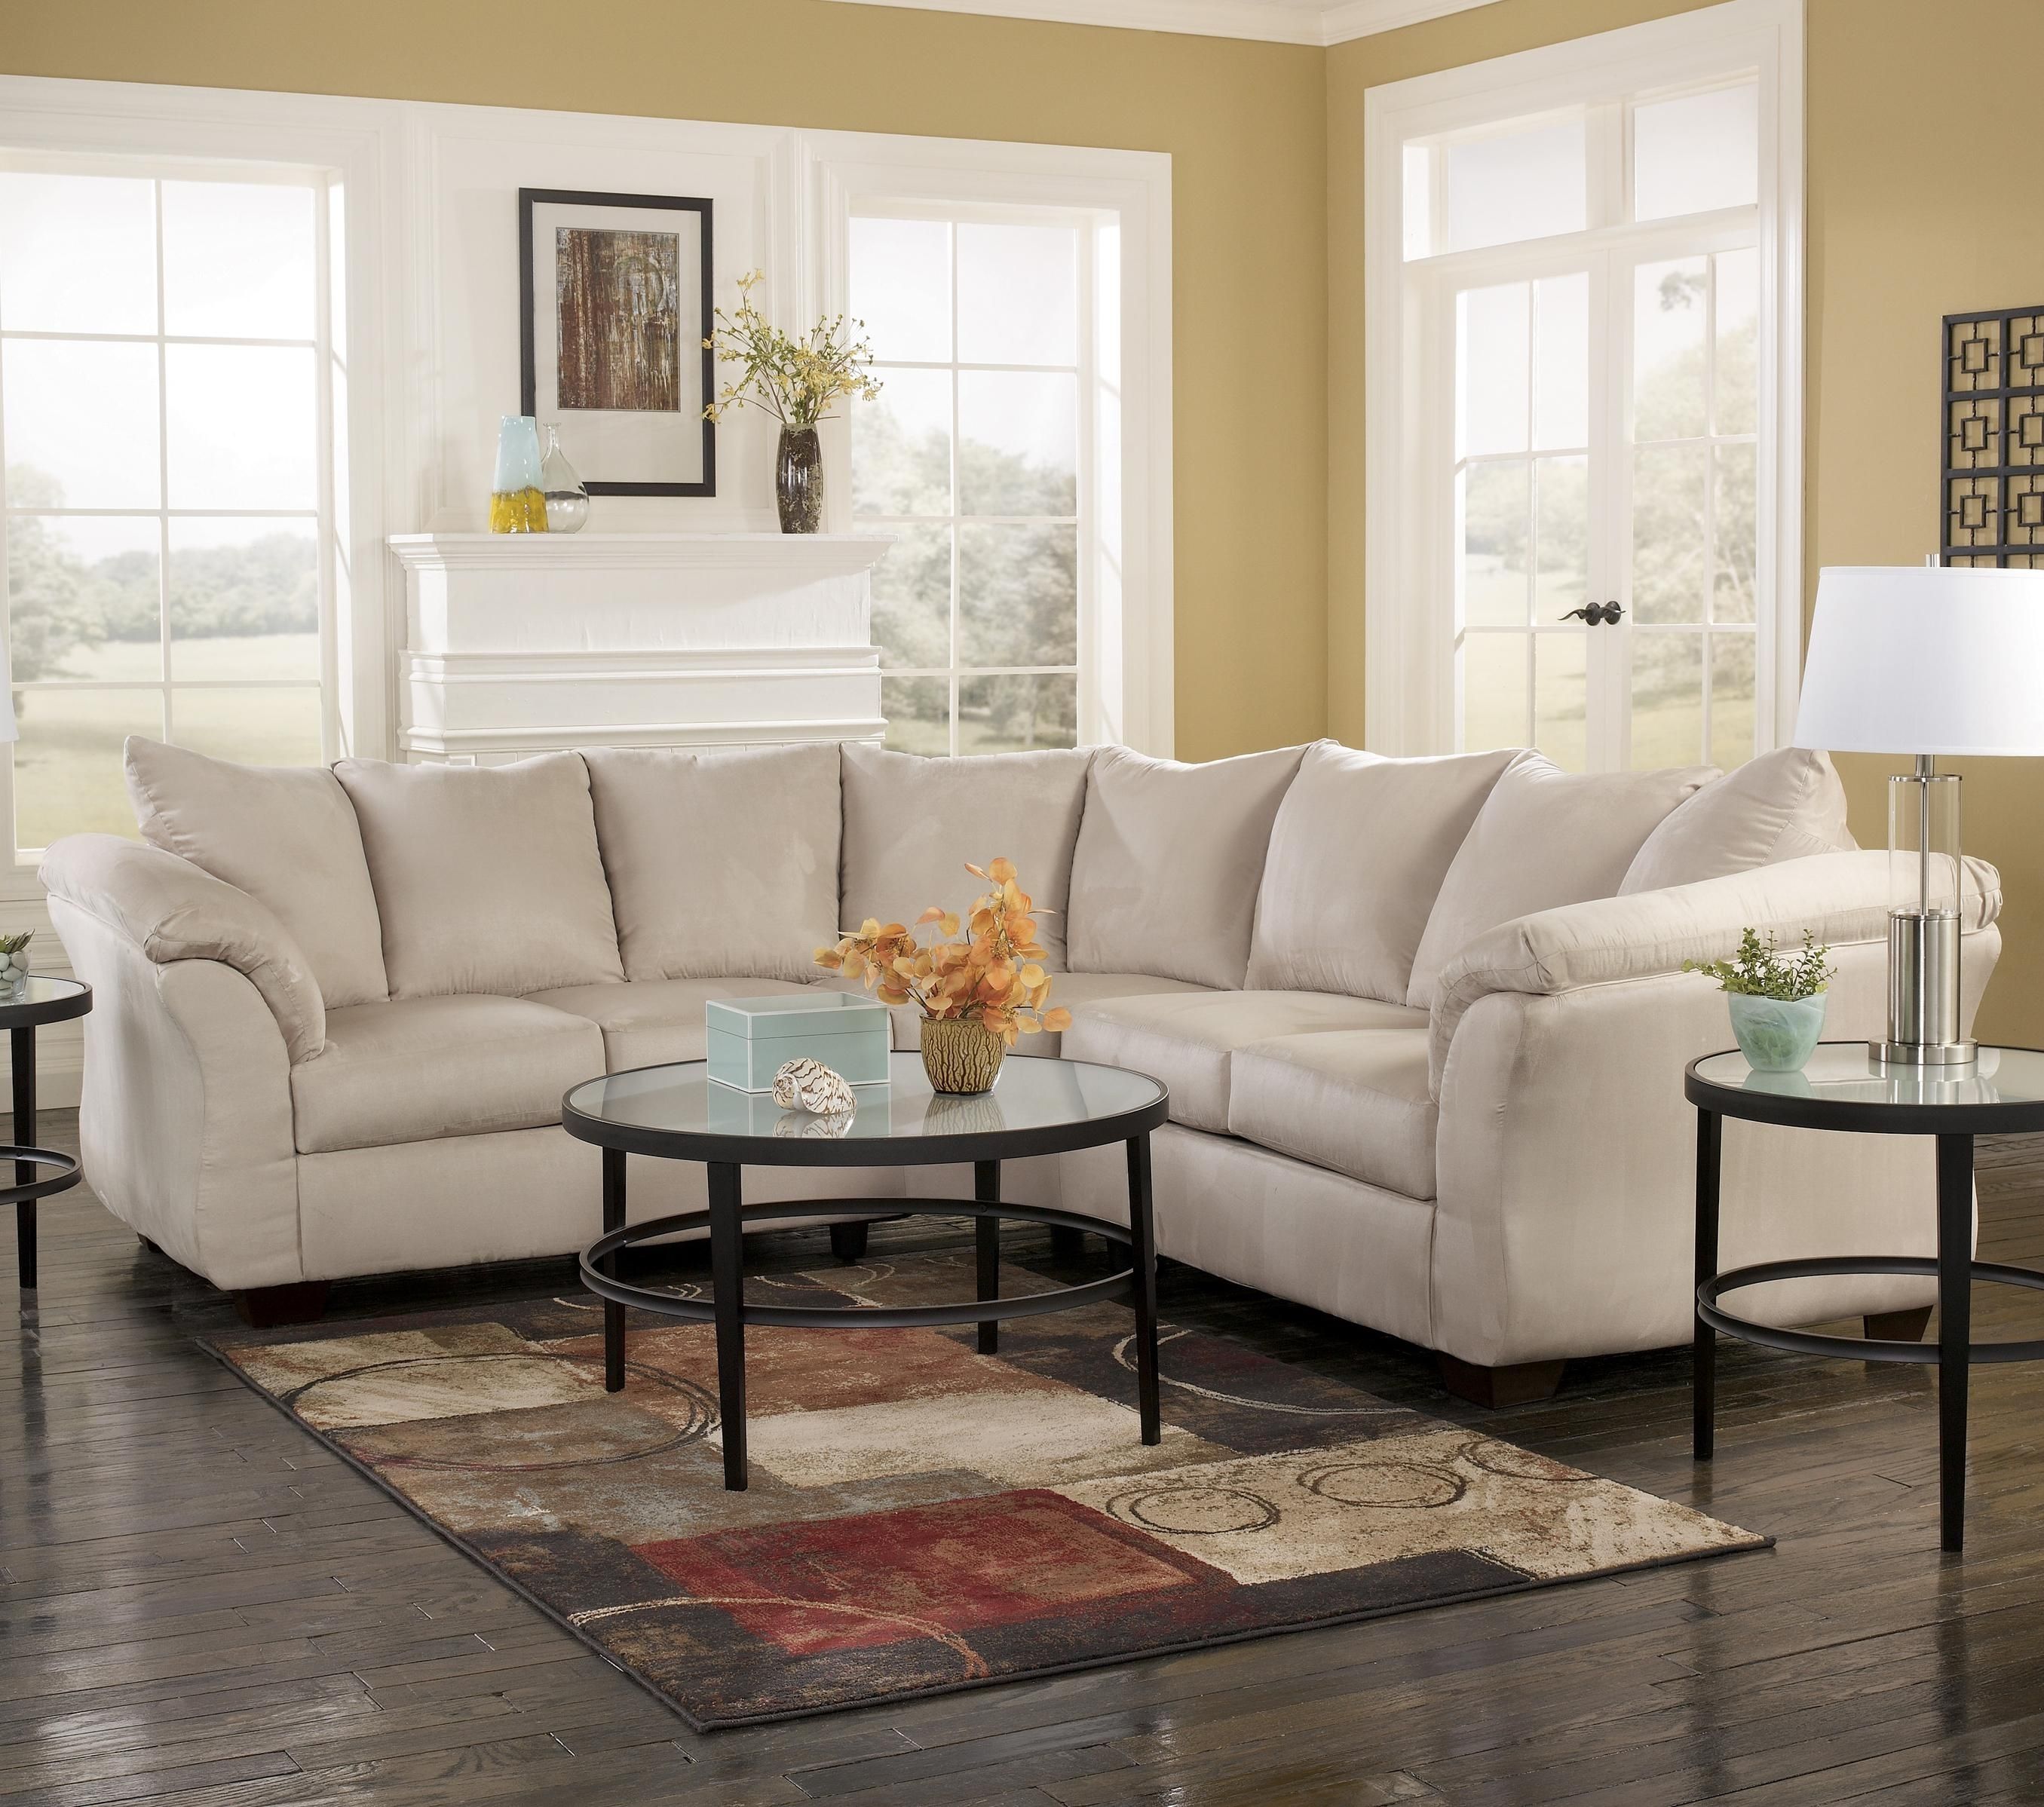 Signature Designashley Darcy – Stone Contemporary Sectional Sofa Intended For Janesville Wi Sectional Sofas (View 8 of 10)